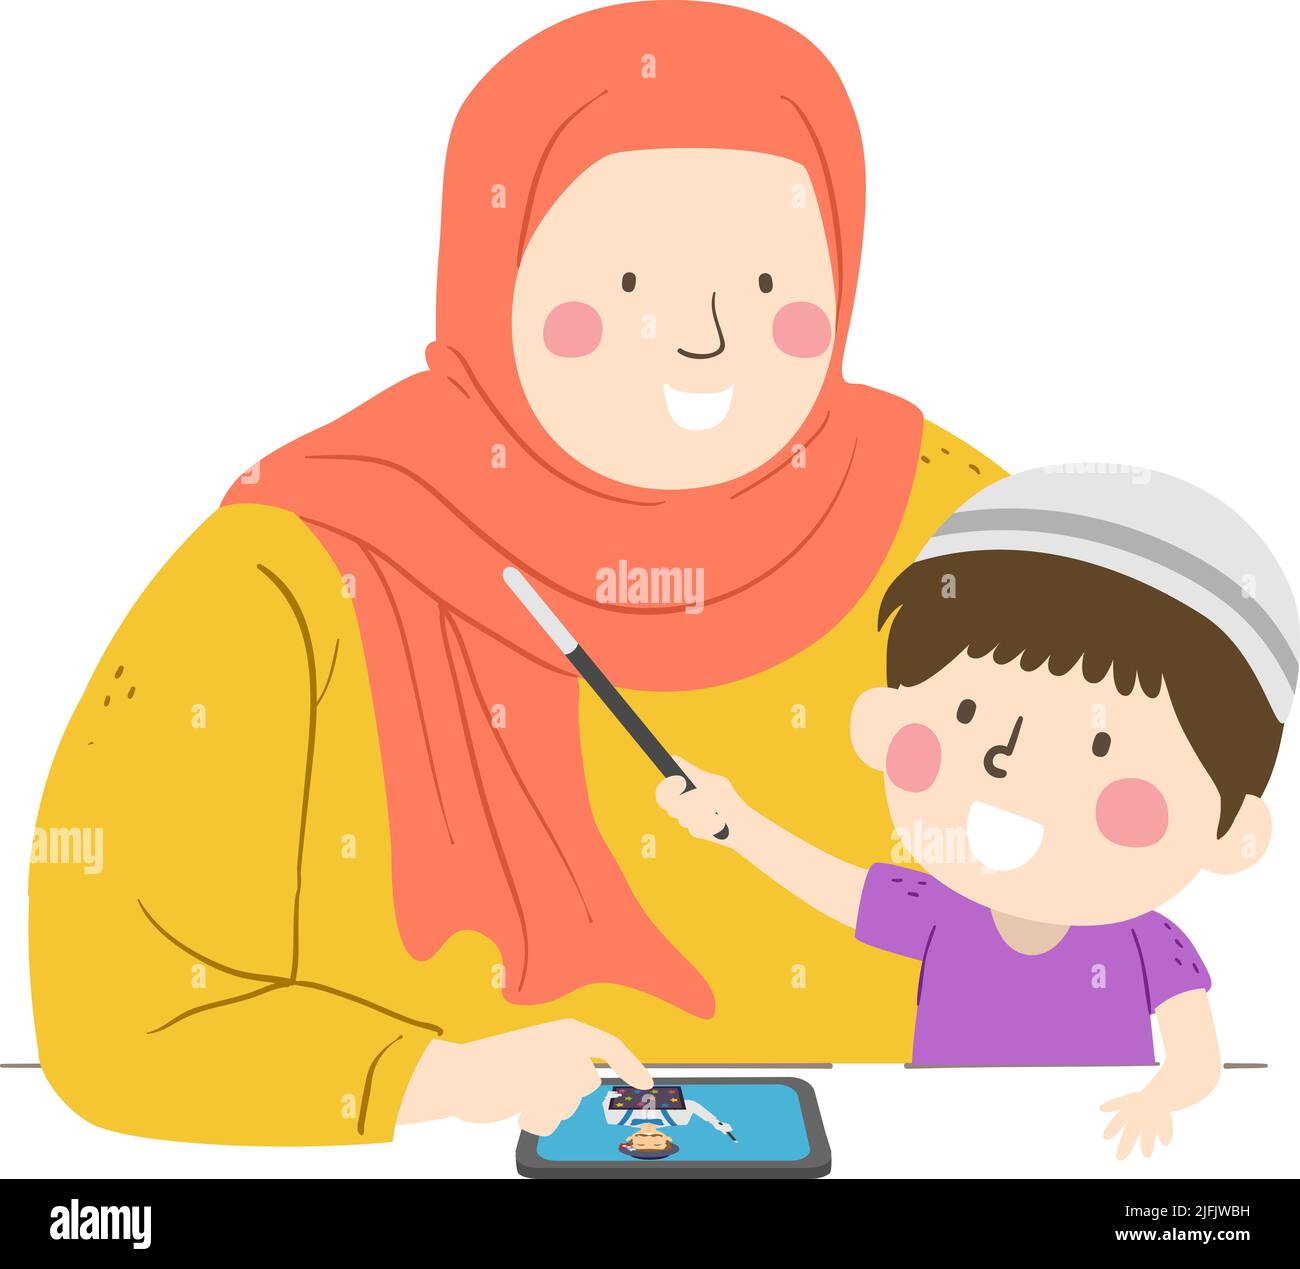 Illustration of Kid Boy Muslim Wearing Taqiyah and Holding Magic Wand with Mom Wearing Hijab Watching Online Magician on Tablet Stock Photo